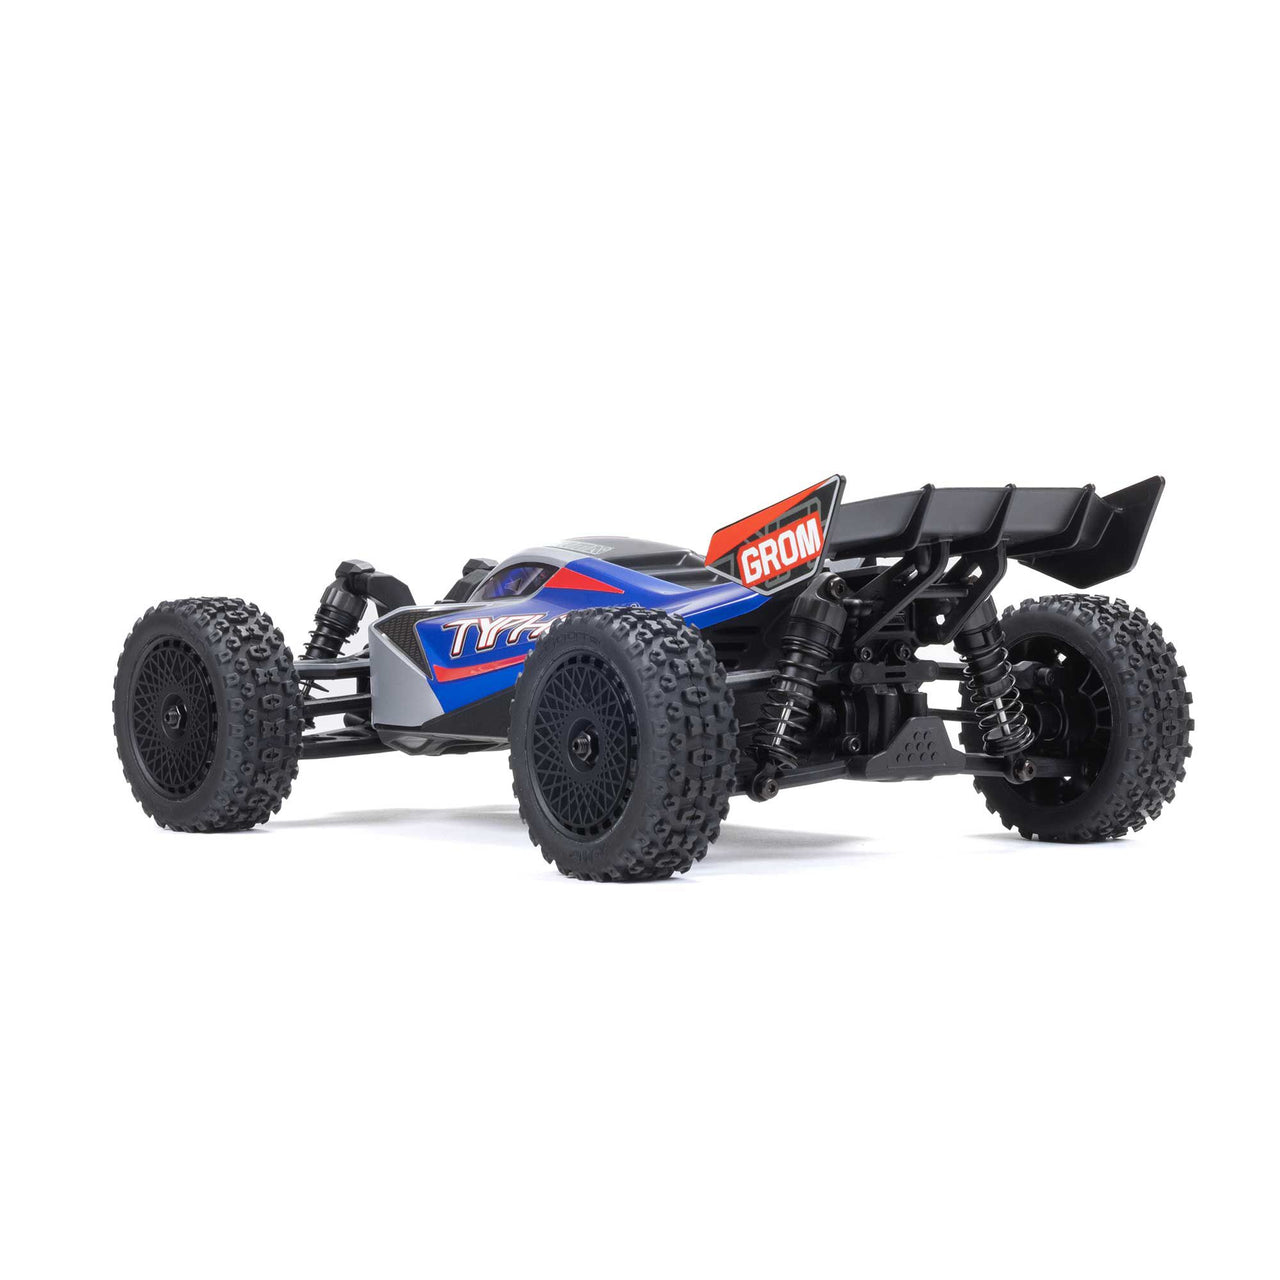 ARA2106T1 TYPHON GROM MEGA 380 Brushed 4X4 Small Scale Buggy RTR with Battery & Charger, Blue/Silver